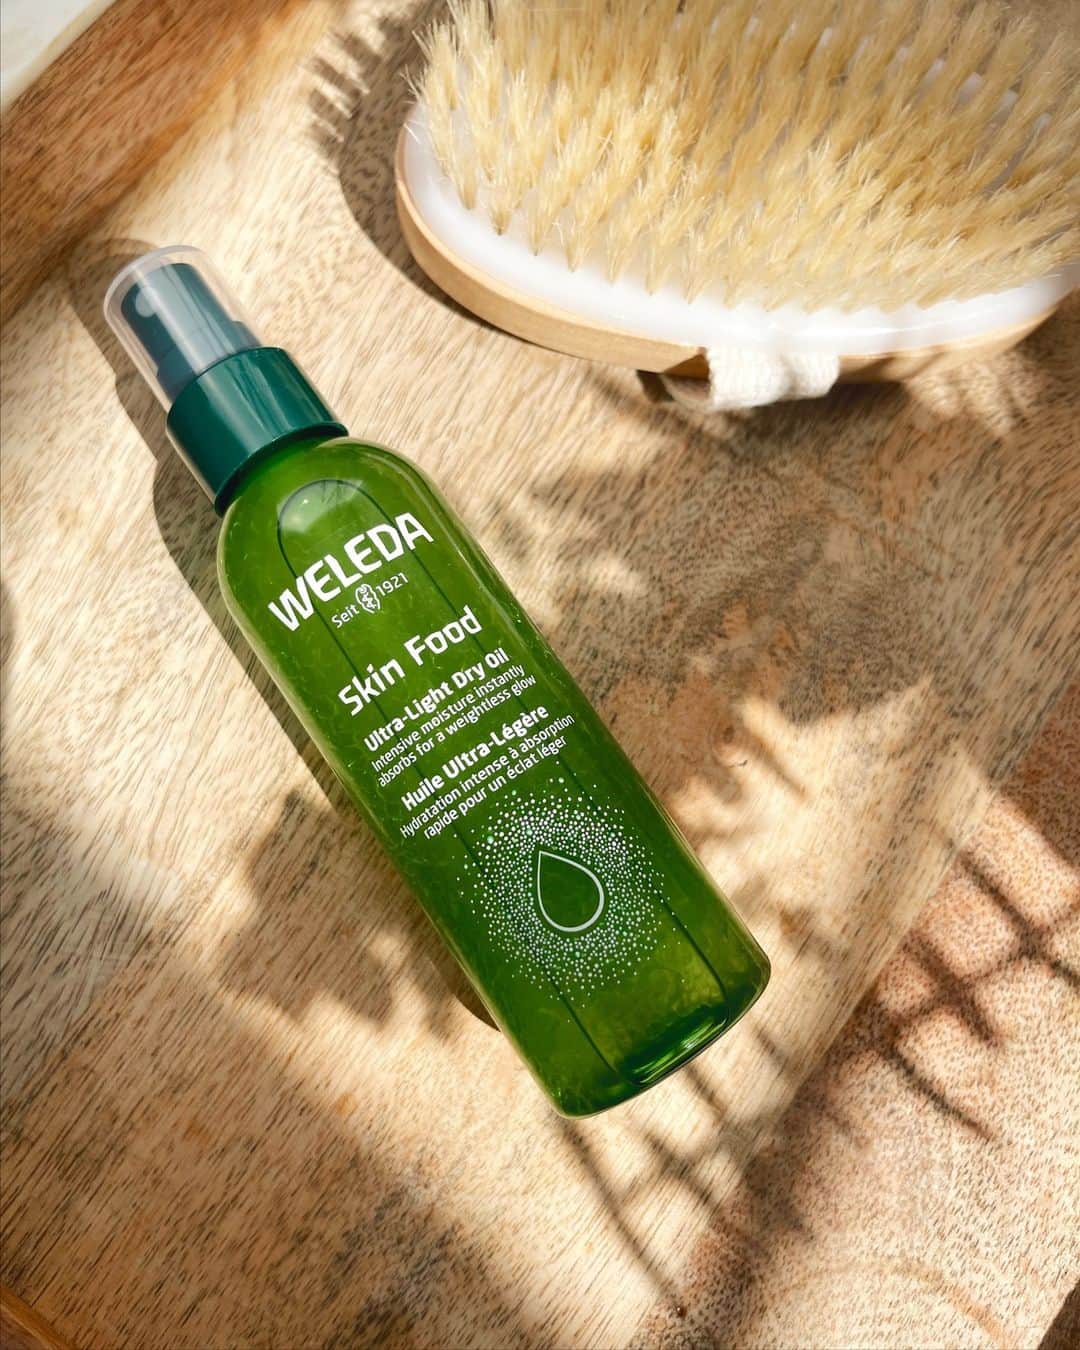 Weledaのインスタグラム：「Did you know? Skin Food Ultra-Light Dry Oil was developed with a unique bi-phase formula! When you shake the bottle, it blends the plant-based extracts and rich oils together to create a lightweight oil that deeply hydrates and nourishes your skin for a luminous glow. 🌿✨ ⁠ ⁠ Shop exclusively on Weleda.com #Weledaskinfood」